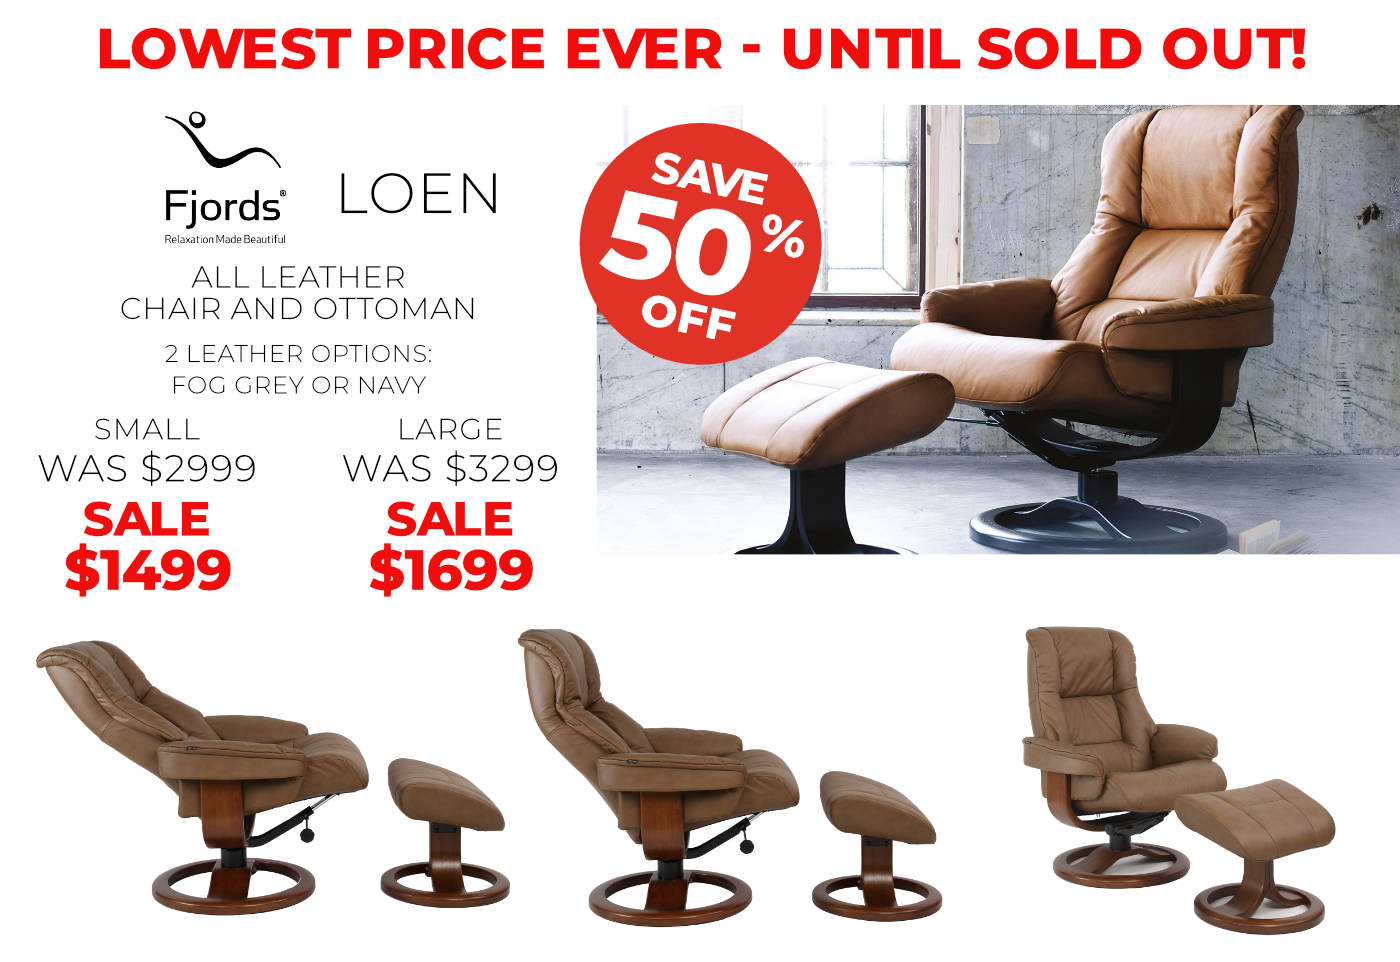 Fjords Loen Leather recliner and ottoman - On lowest price ever - while stock remains